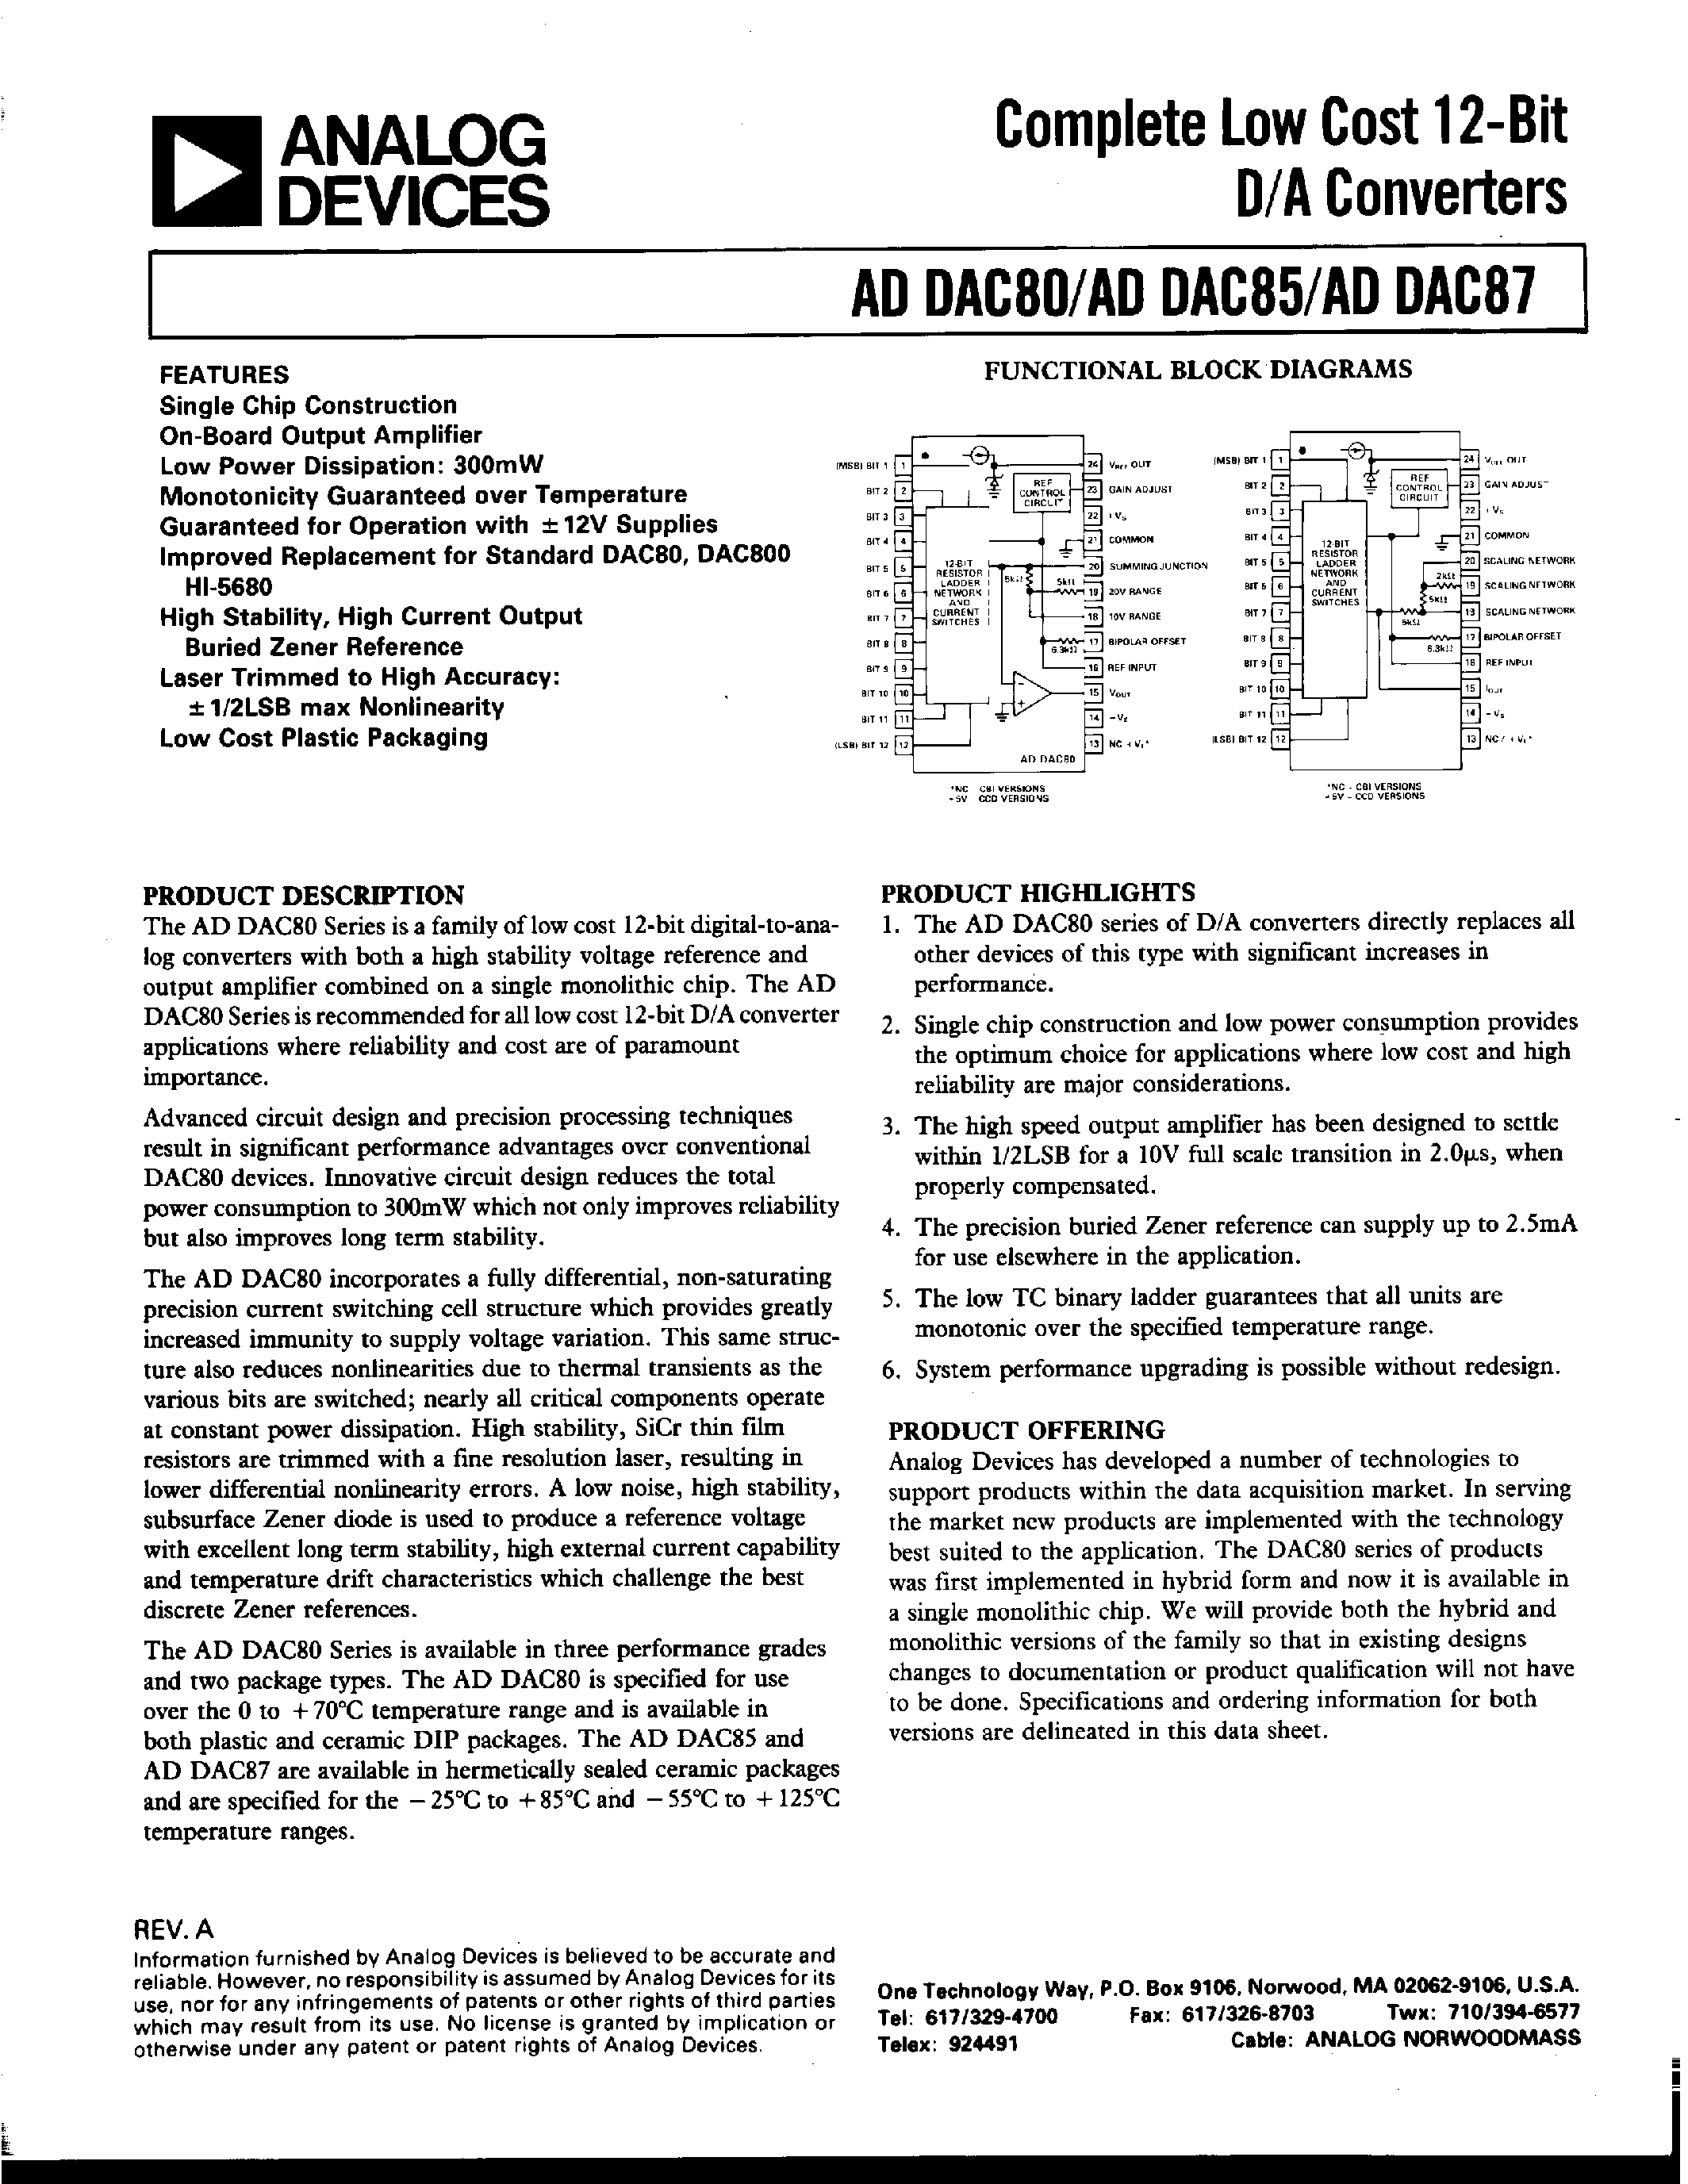 Datasheet ADDAC80Z-CBI-I - COMPLETE LOW COST 12-BIT D/A CONVERTERS page 1